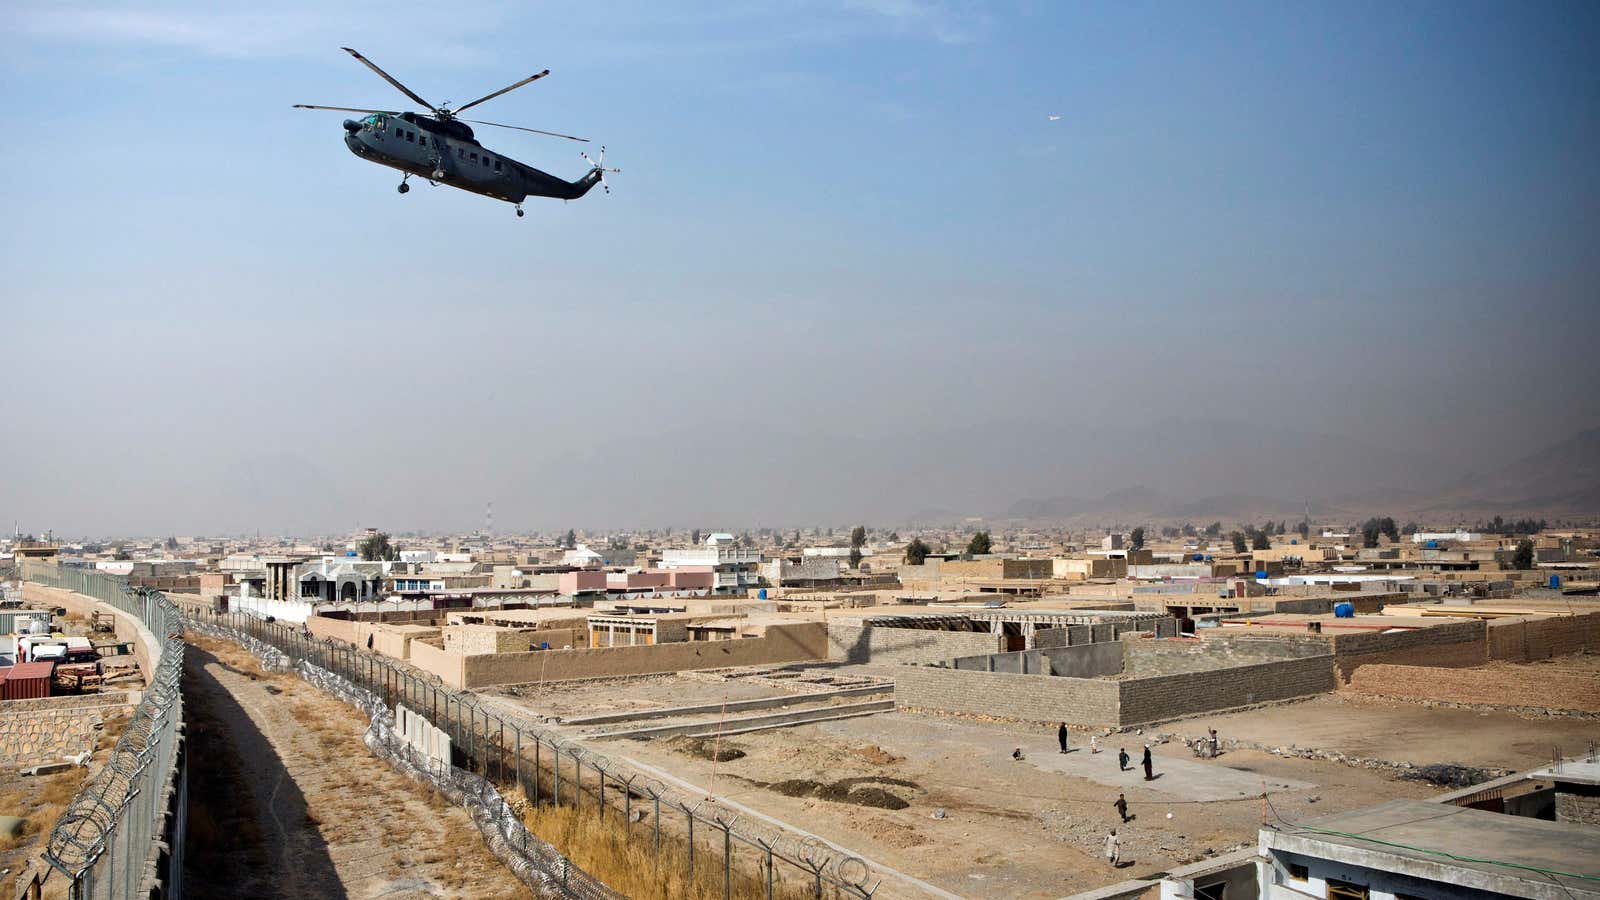 The US’ sudden withdrawal from Afghanistan has caused chaos on the ground.